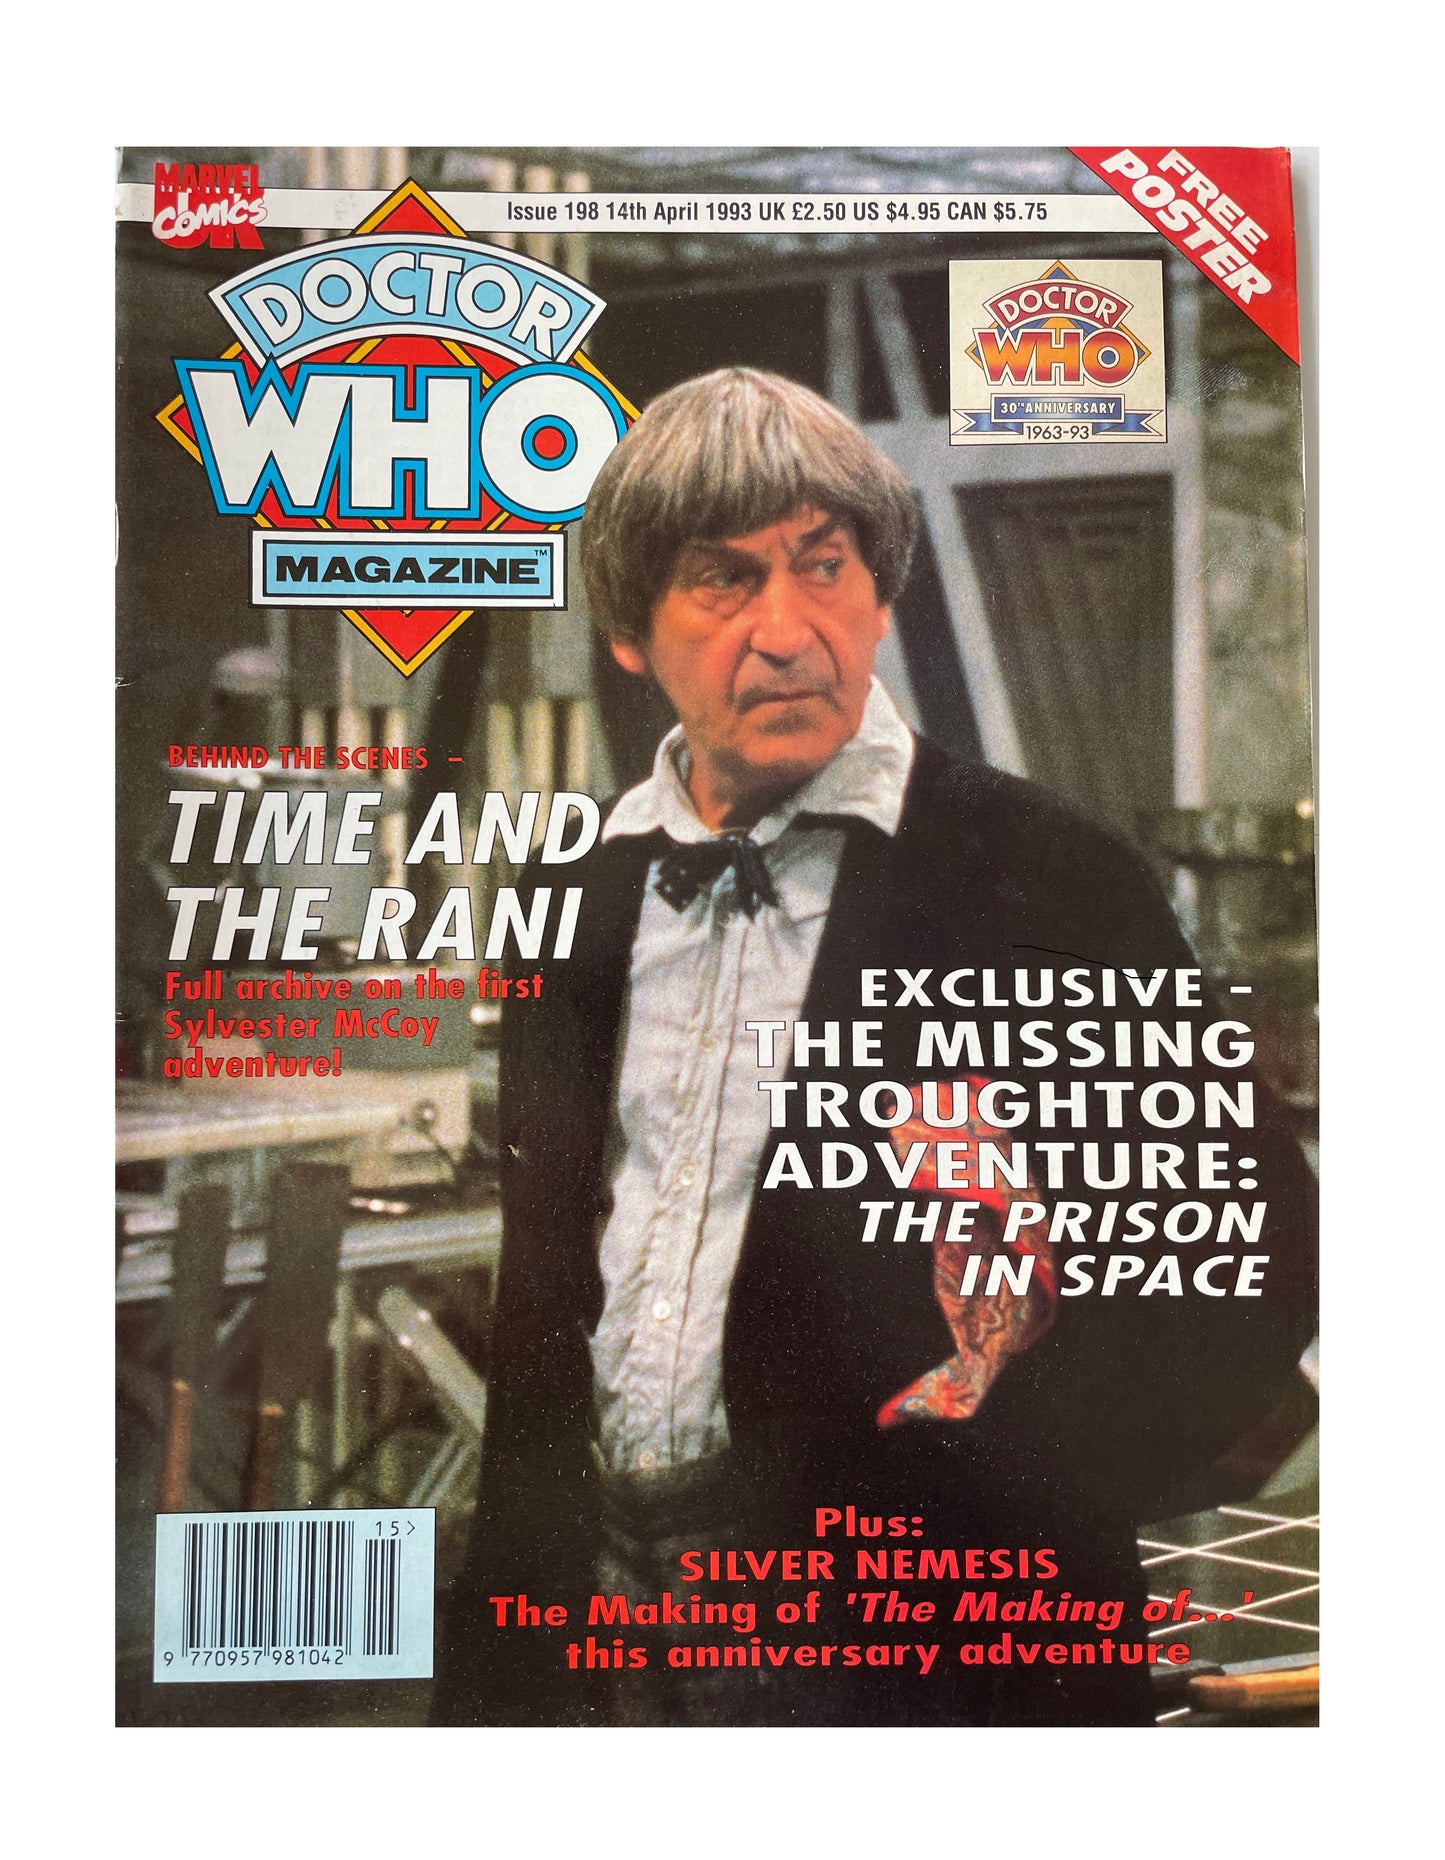 Vintage BBC Doctor Dr Who Magazine Issue Number 198 14th April 1993 - With Free Poster